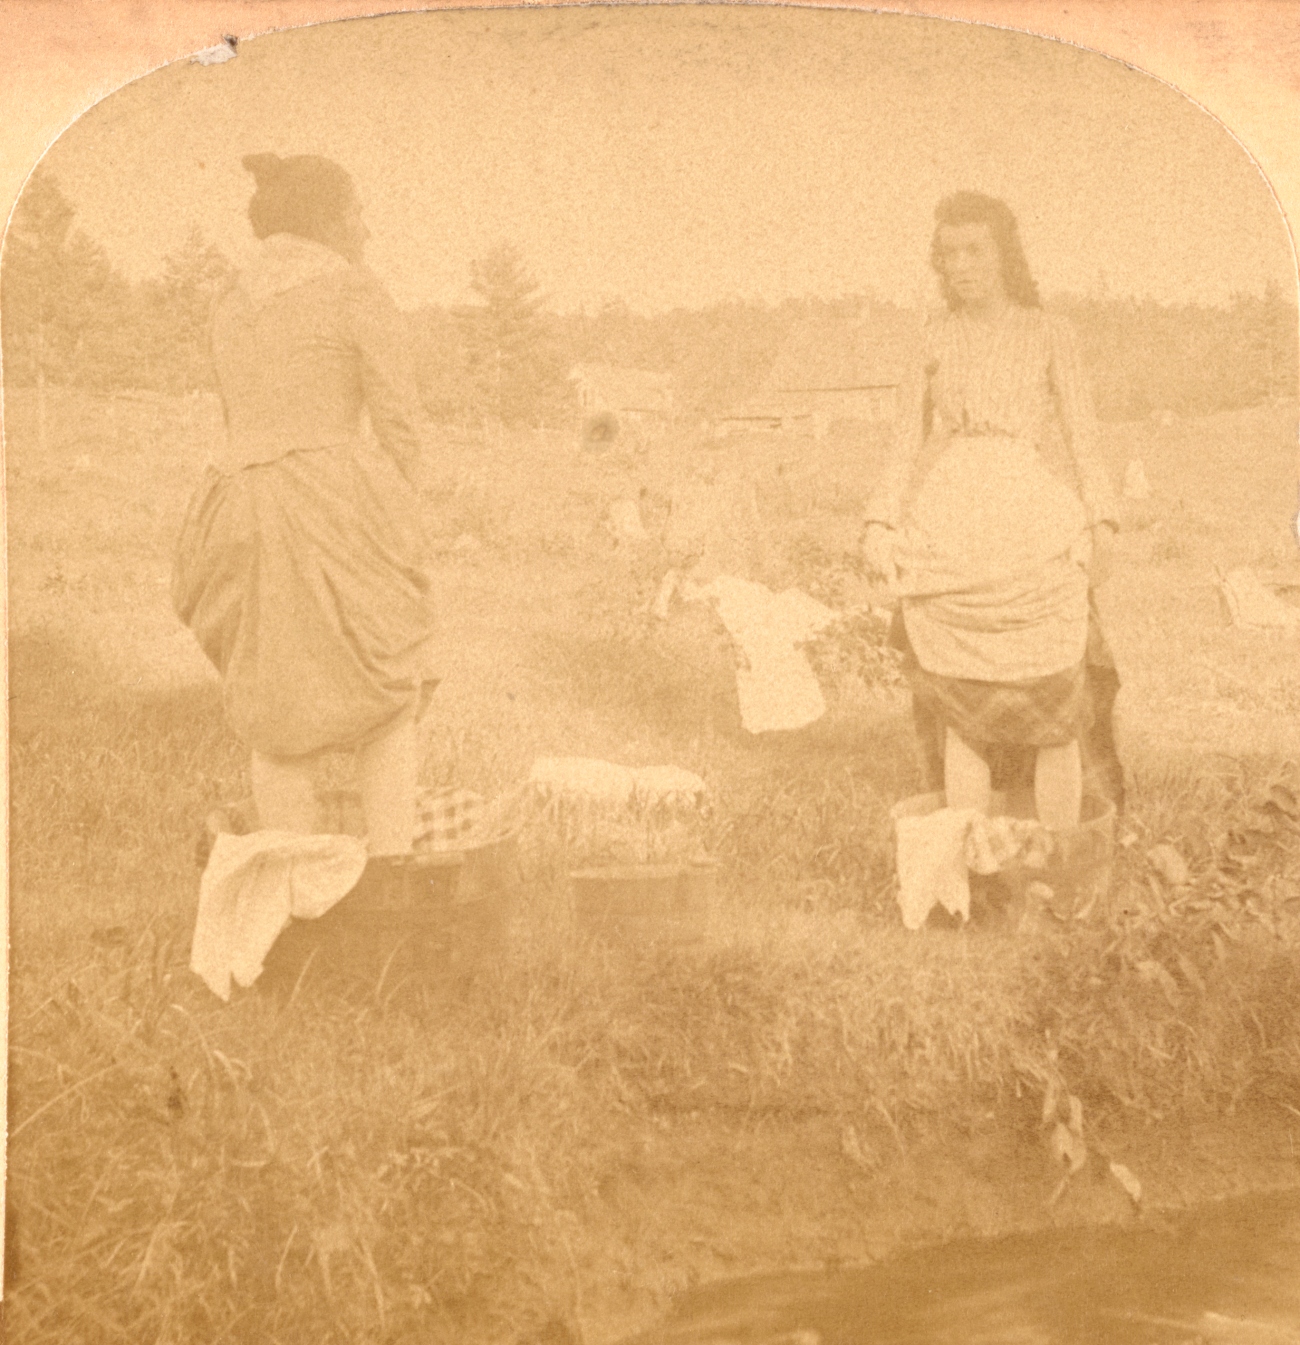 2 women washing clothes in buckets 1800s